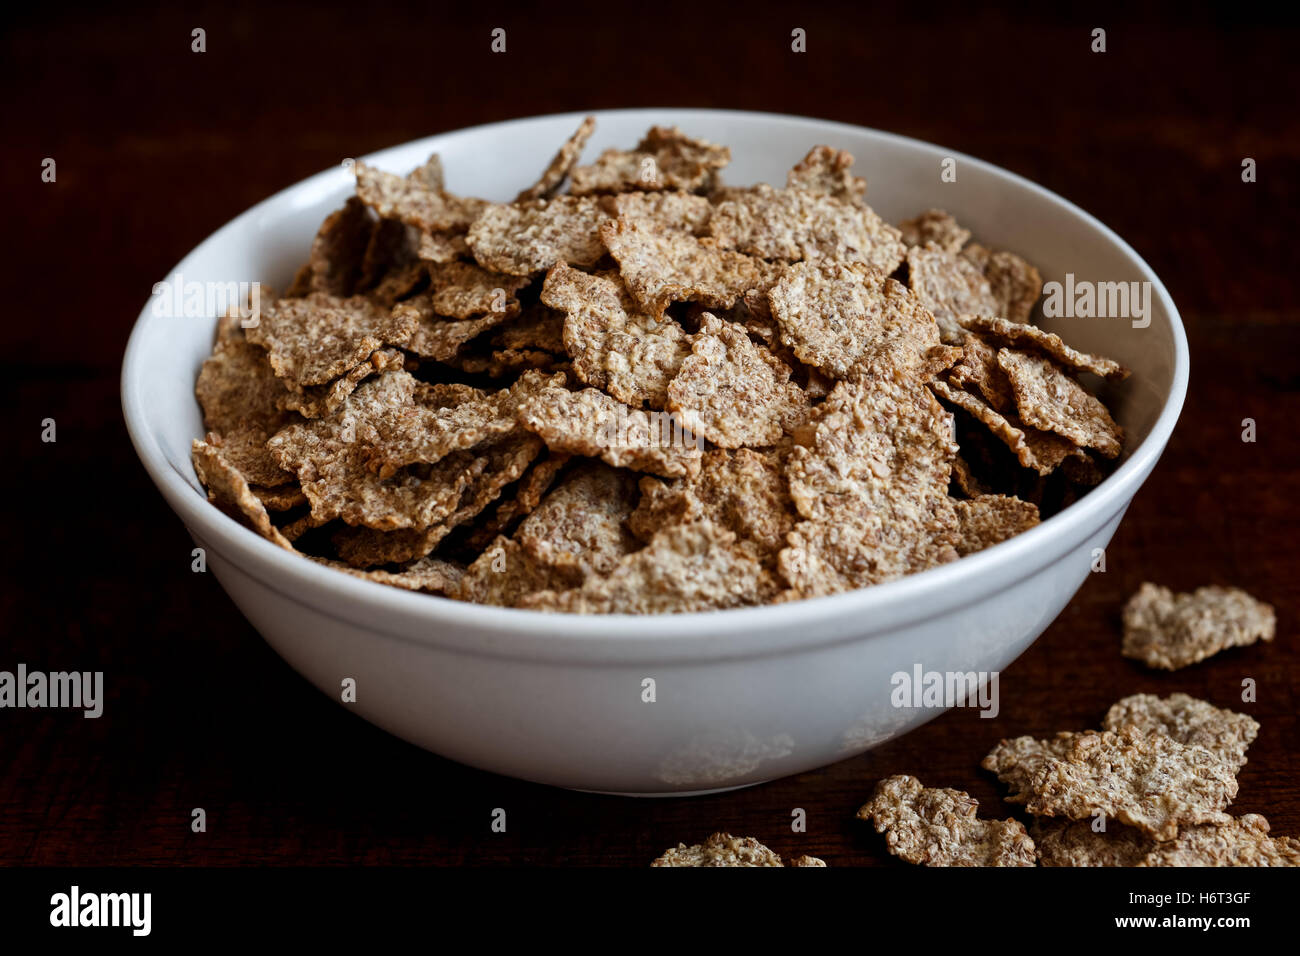 Wheat bran breakfast cereal with no milk in ceramic bowl. Moody lighting on  dark rustic wood surface. Spilt flakes next to bowl Stock Photo - Alamy